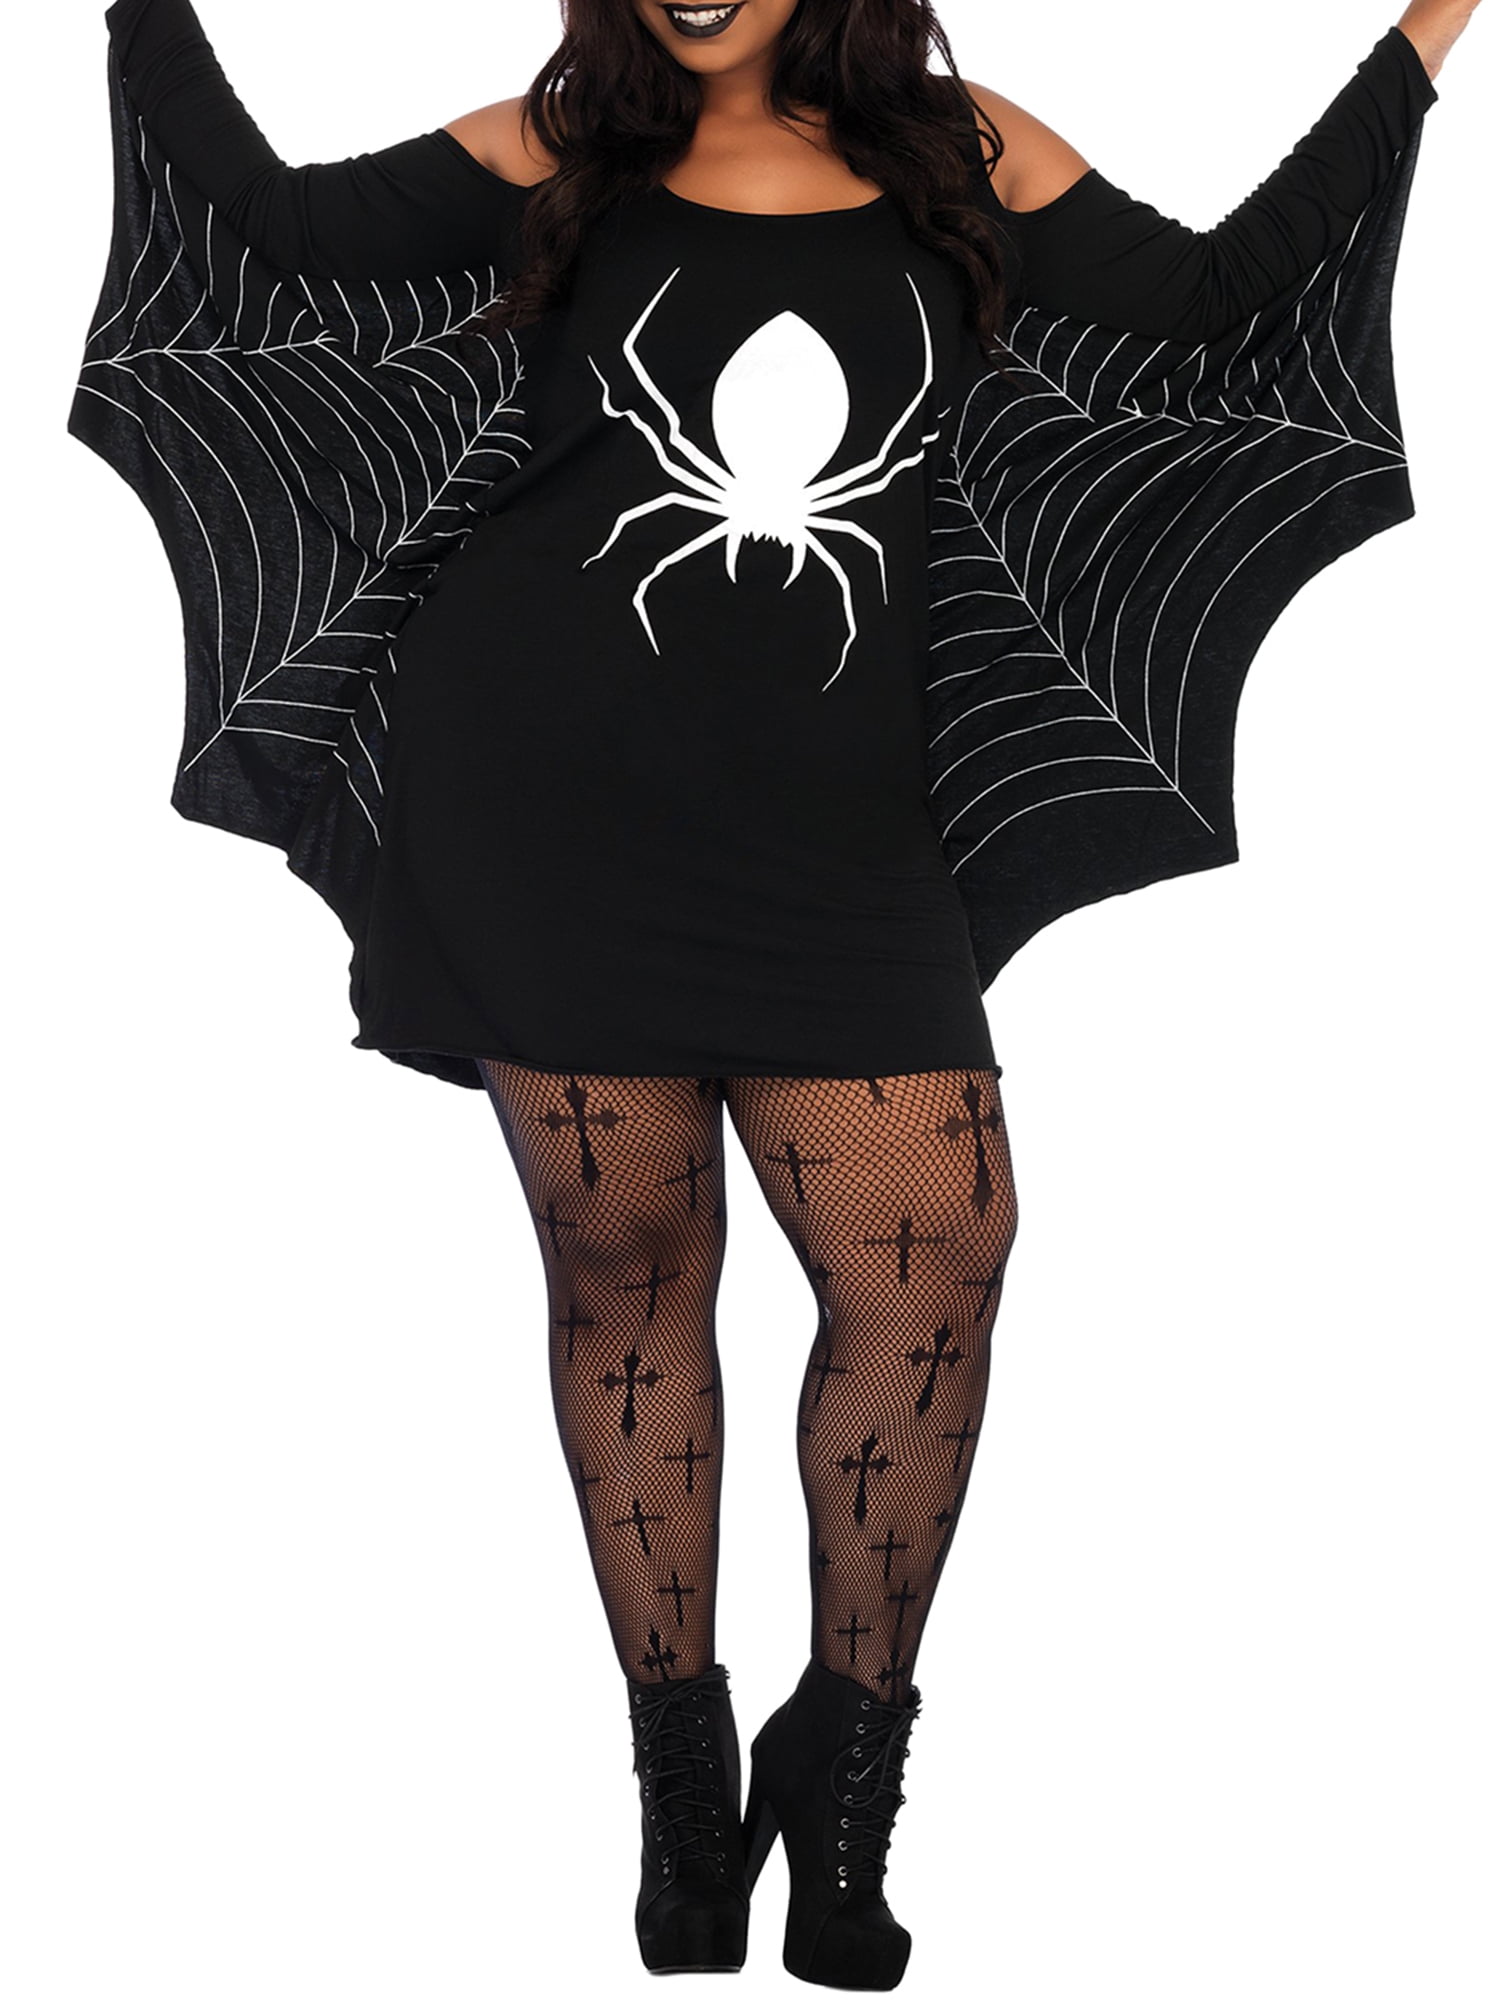 Spider Cosplay Halloween Costumes for Women Long Sleeve Cold Shoulder Bat Wings Bodycon Bat Role Play Mini Dress - Walmart.com